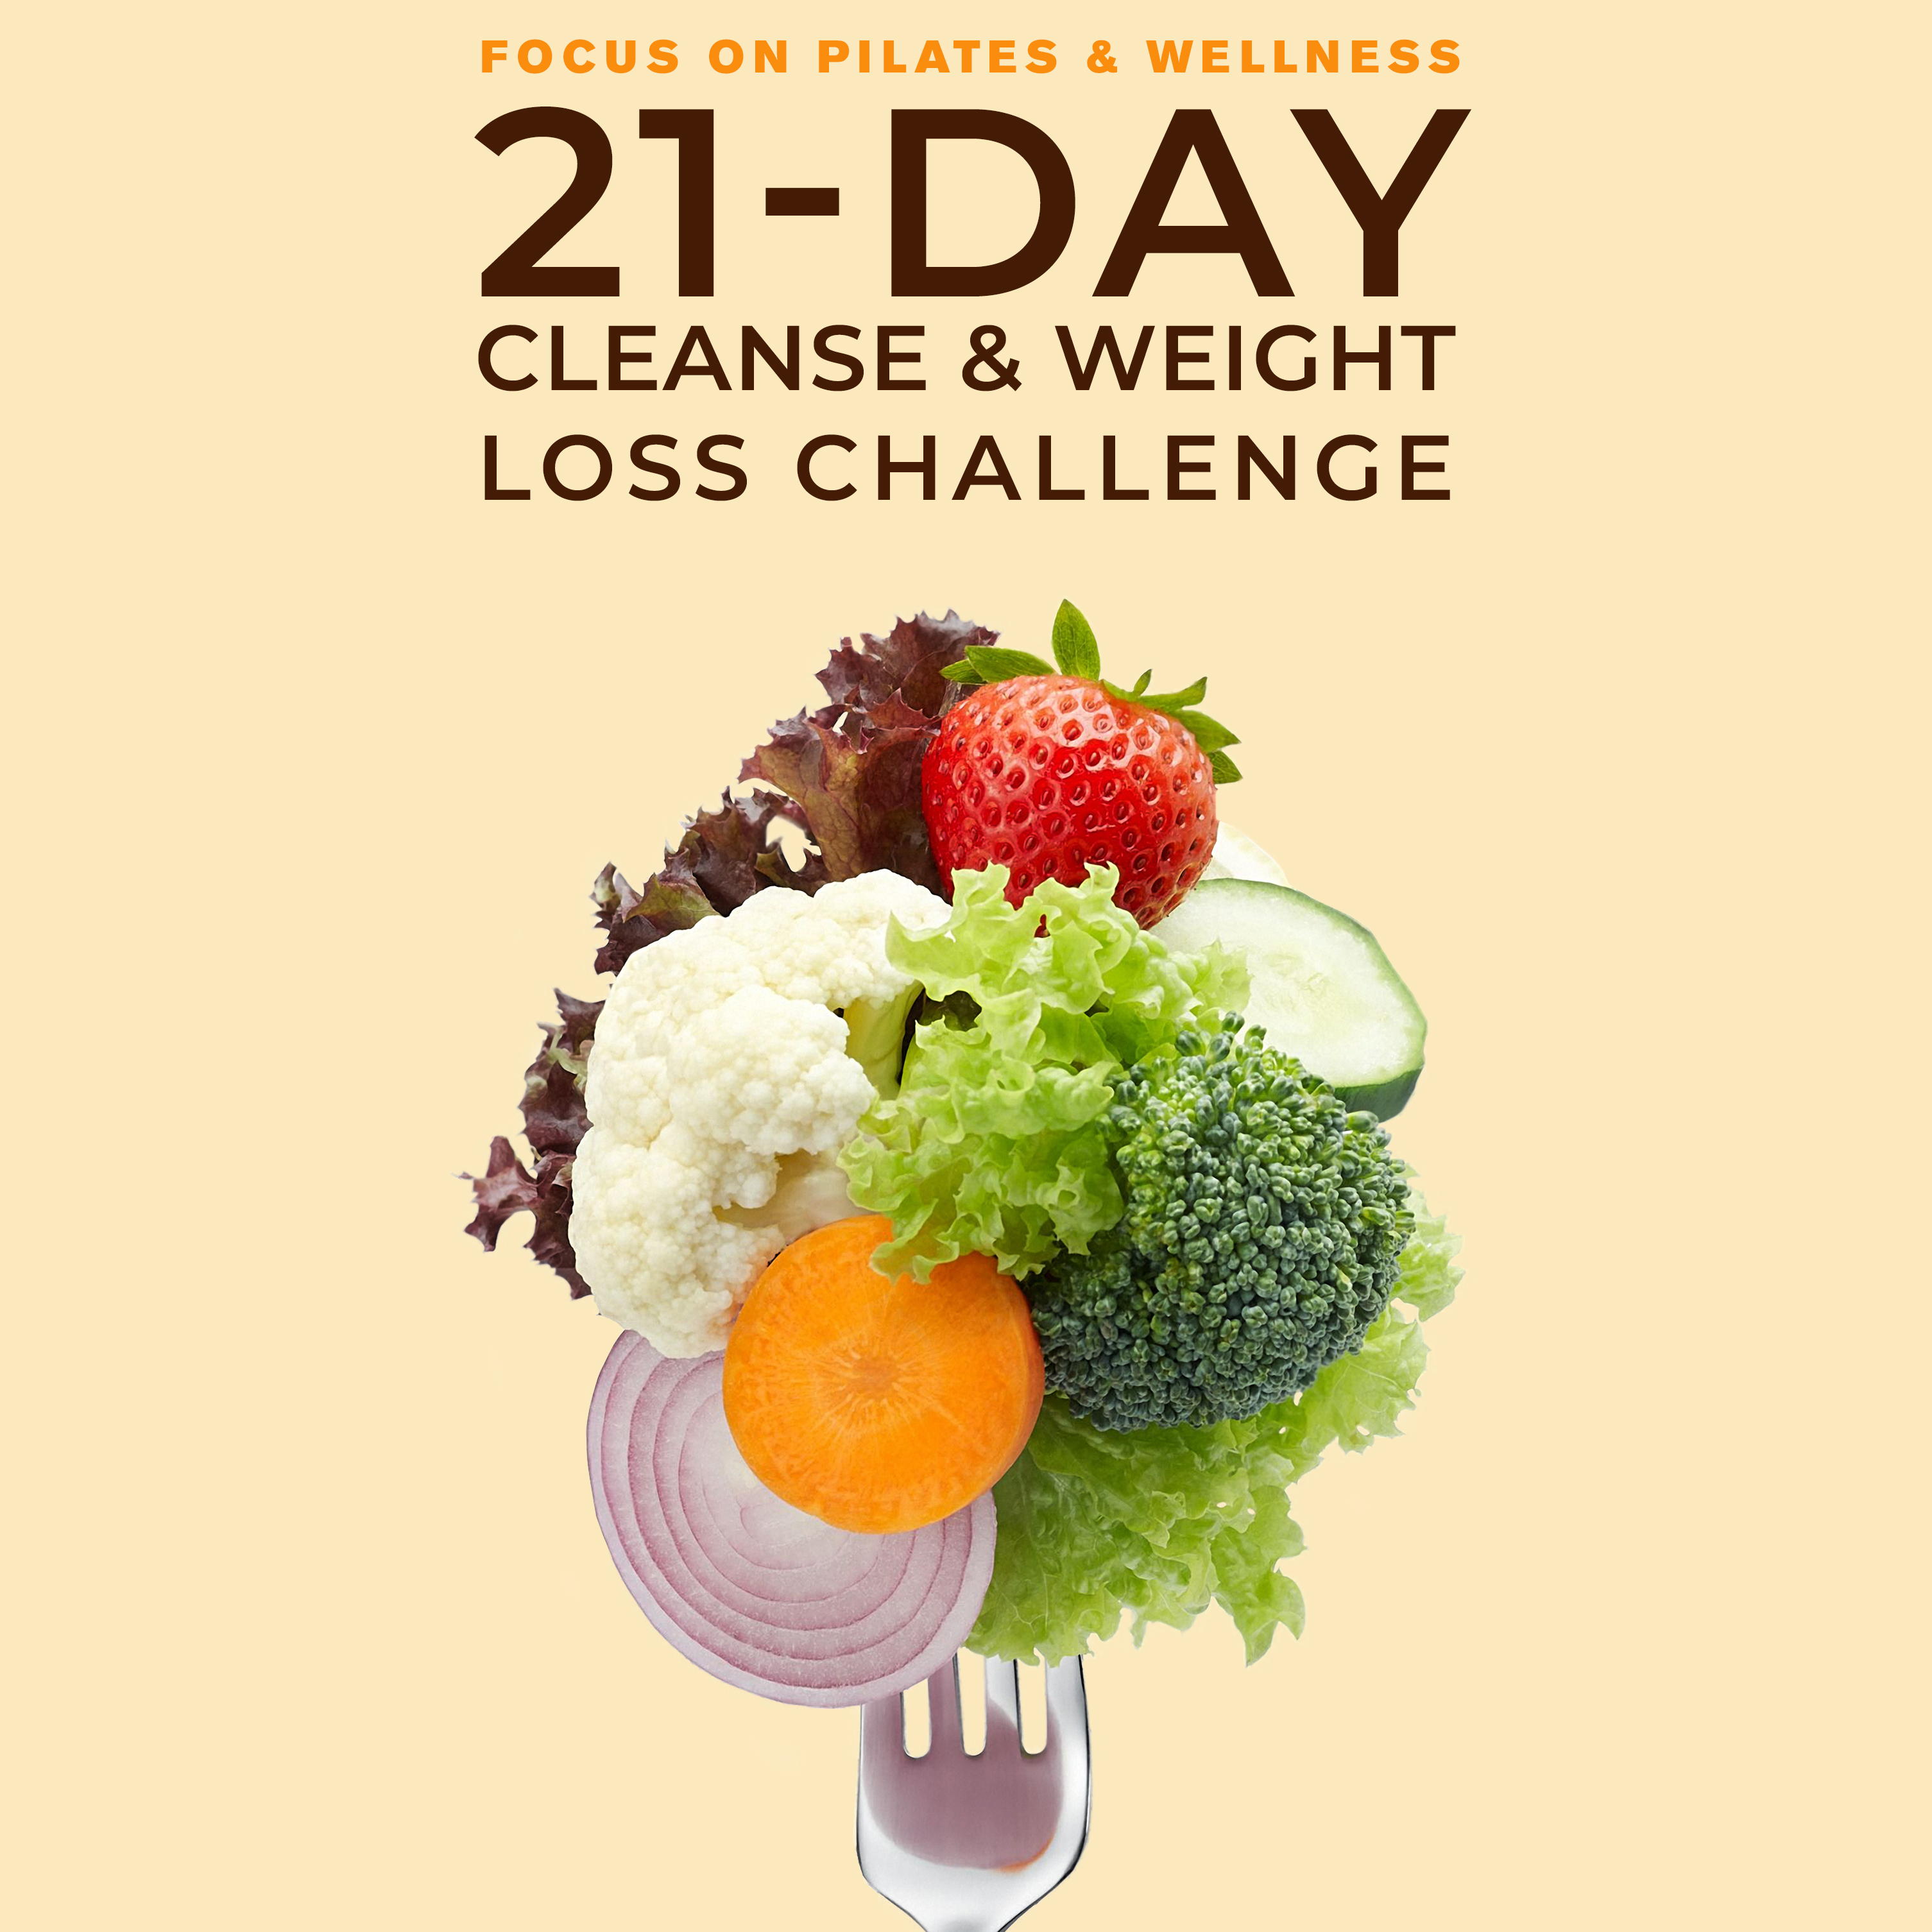 21-Day cleanse & weight loss challenge - Focus Physical Therapy and Wellness